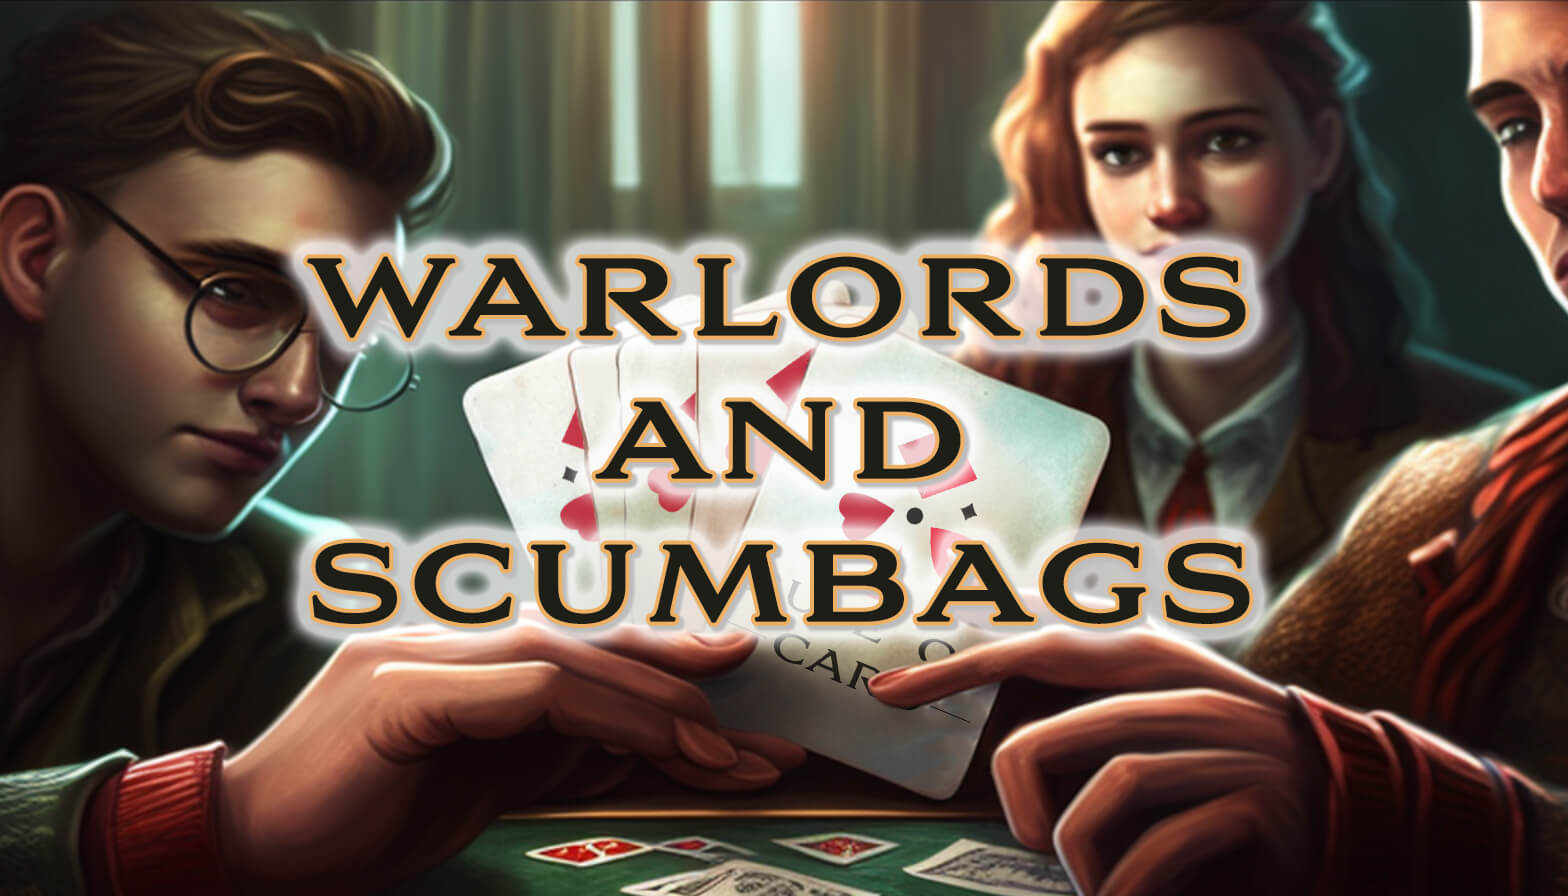 Playing the card game Warlords and Scumbags